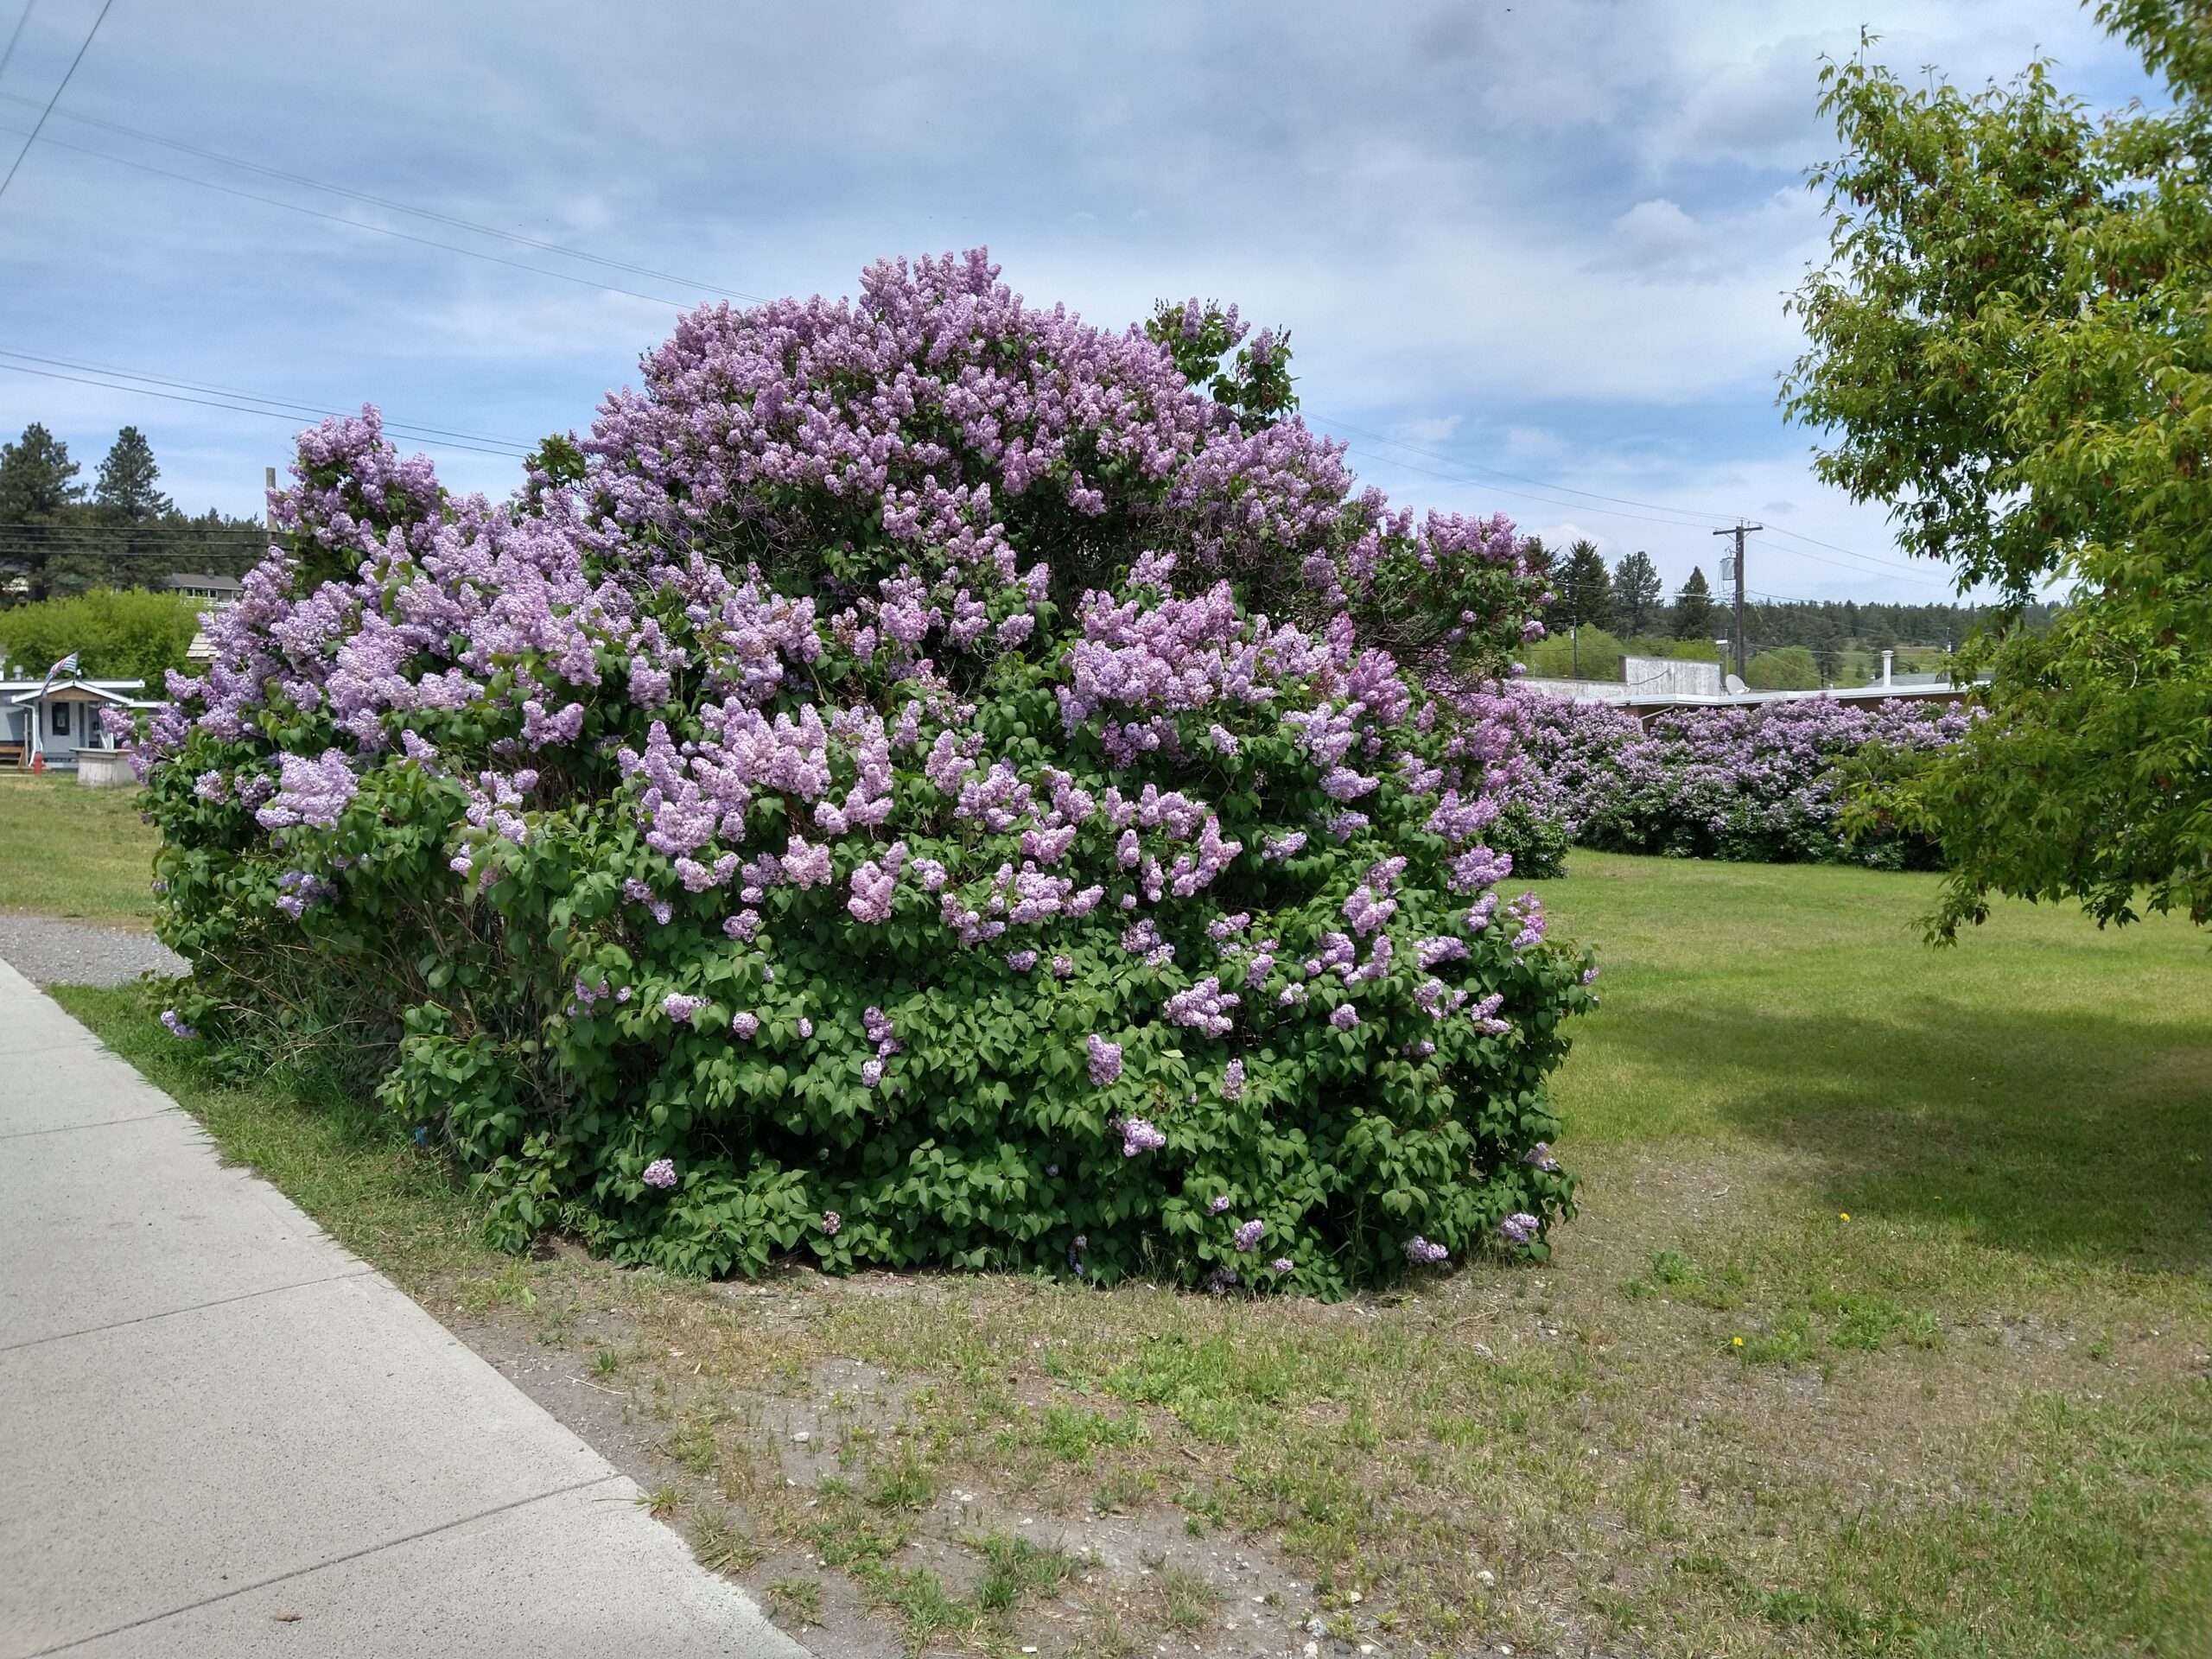 A photo of the abundant lilac bushes in my village